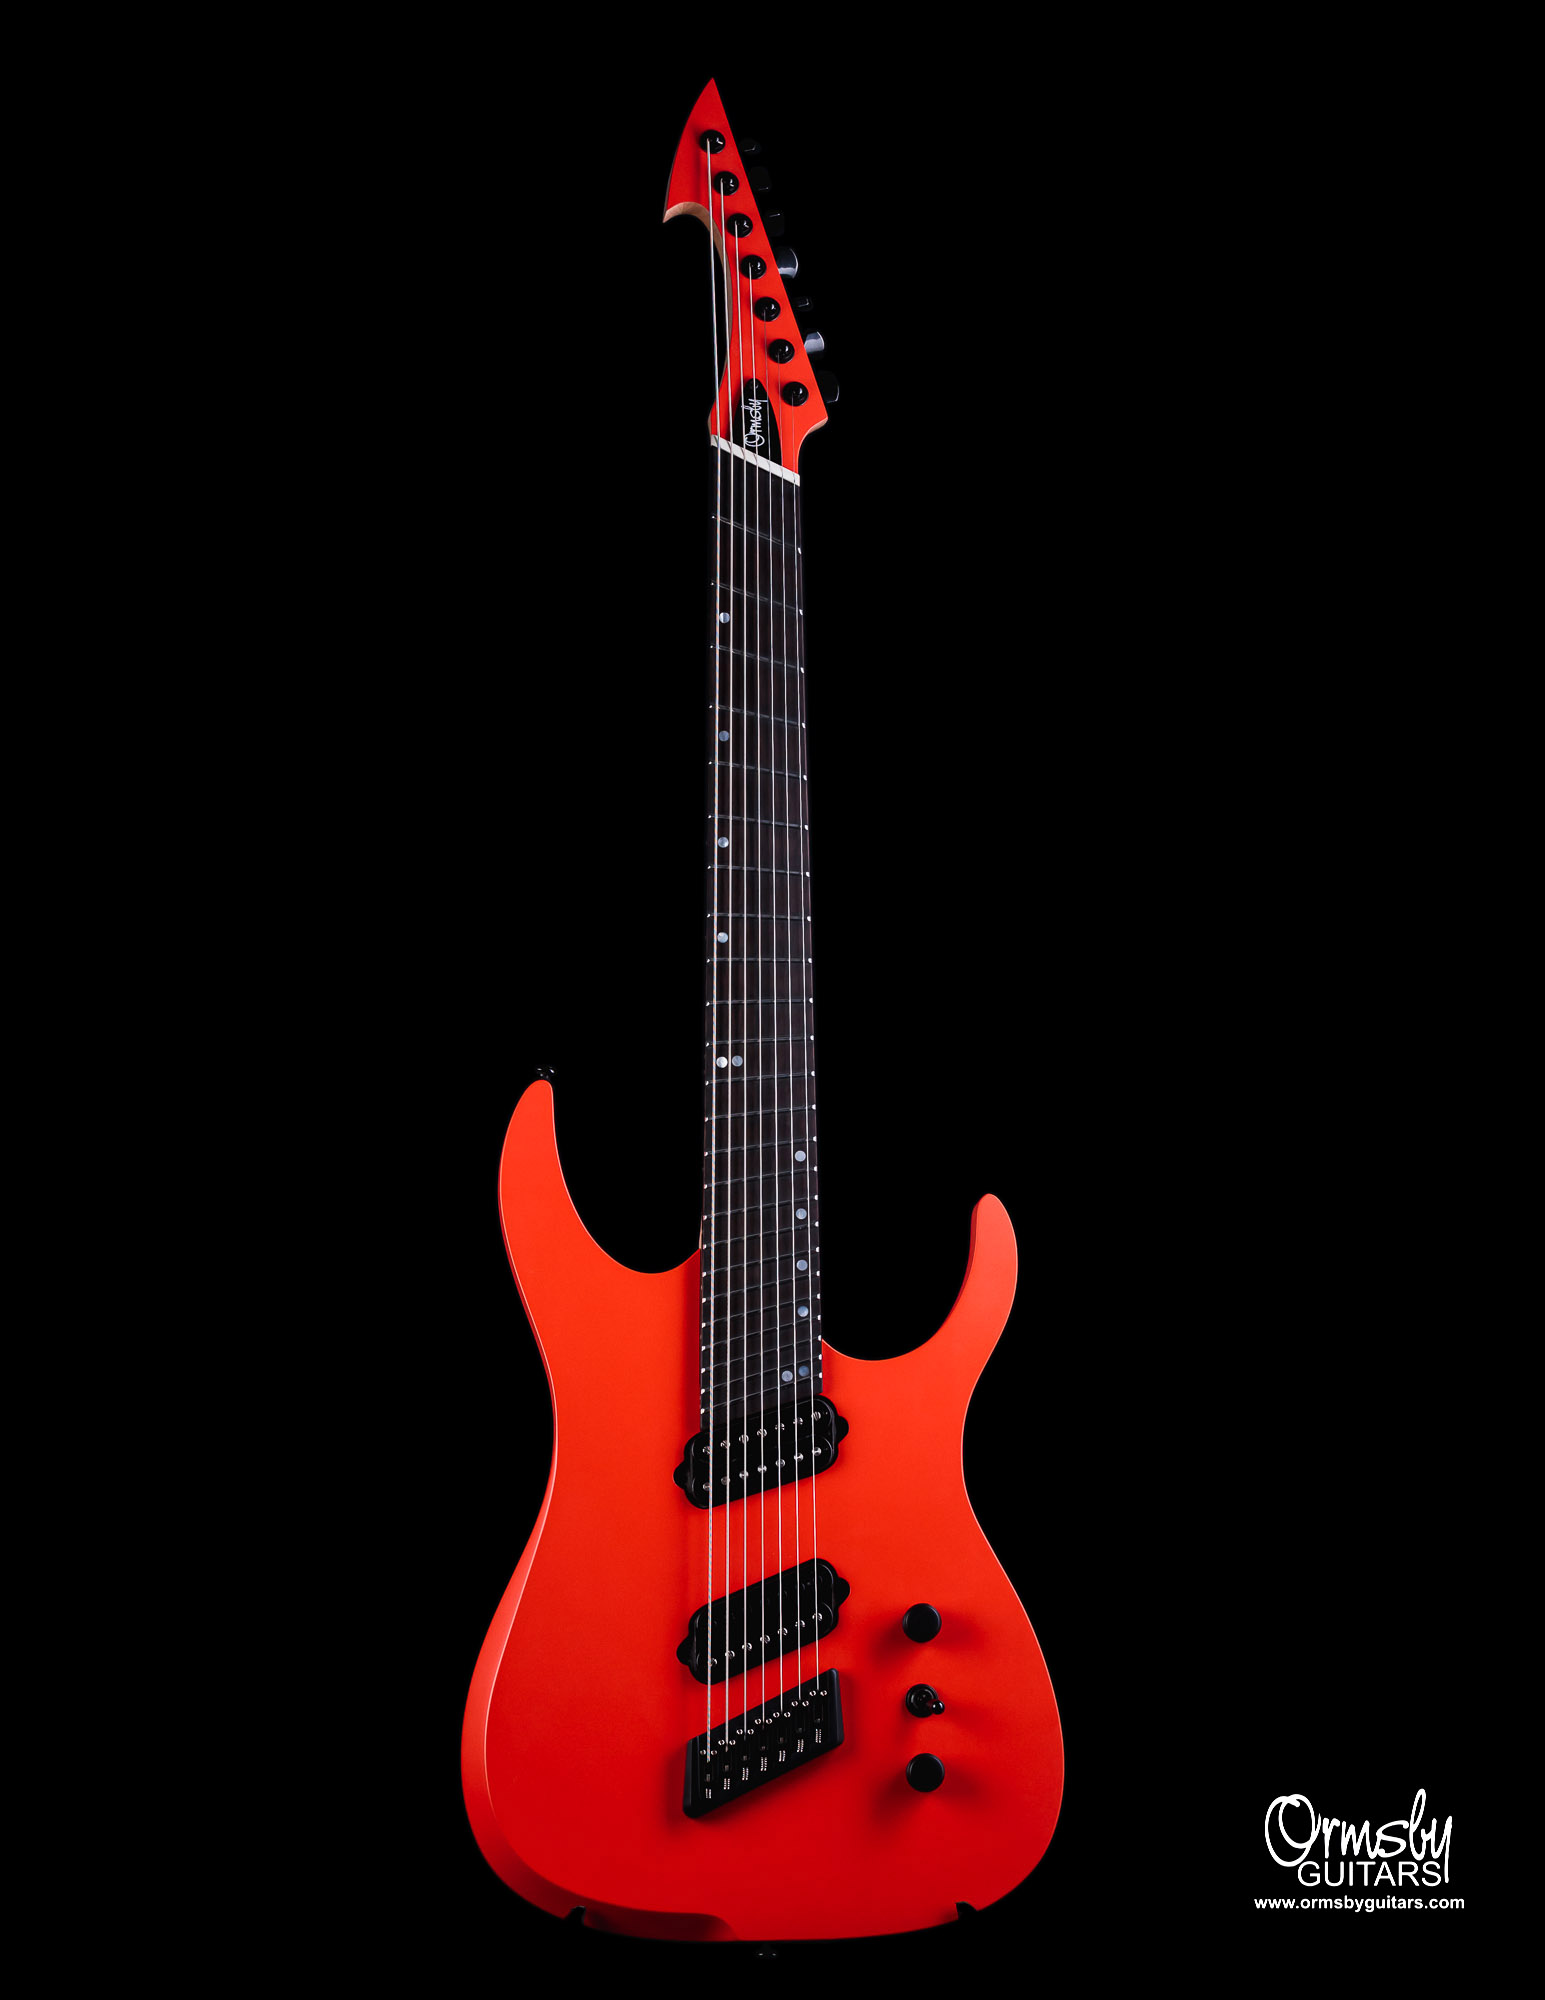 Ormsby guitars factory standard hype